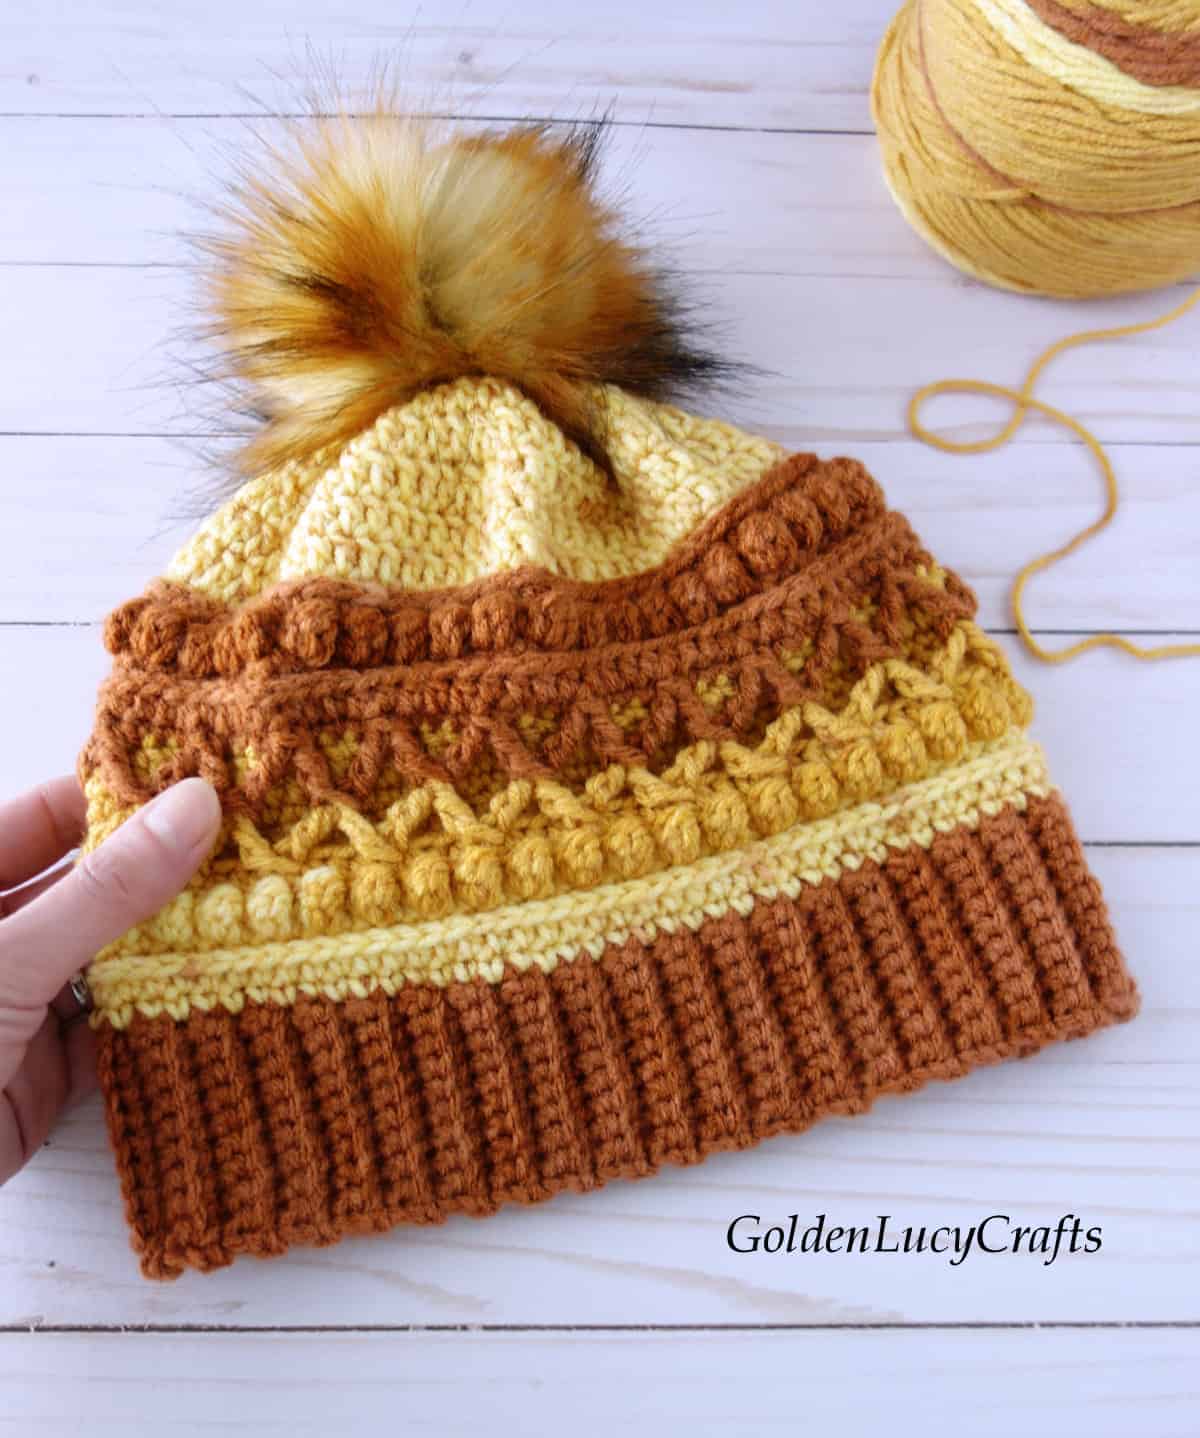 Hand holding crocheted hat in brown, orange and yellow colors embellished with faux fur pompom, ball of yarn in the background.